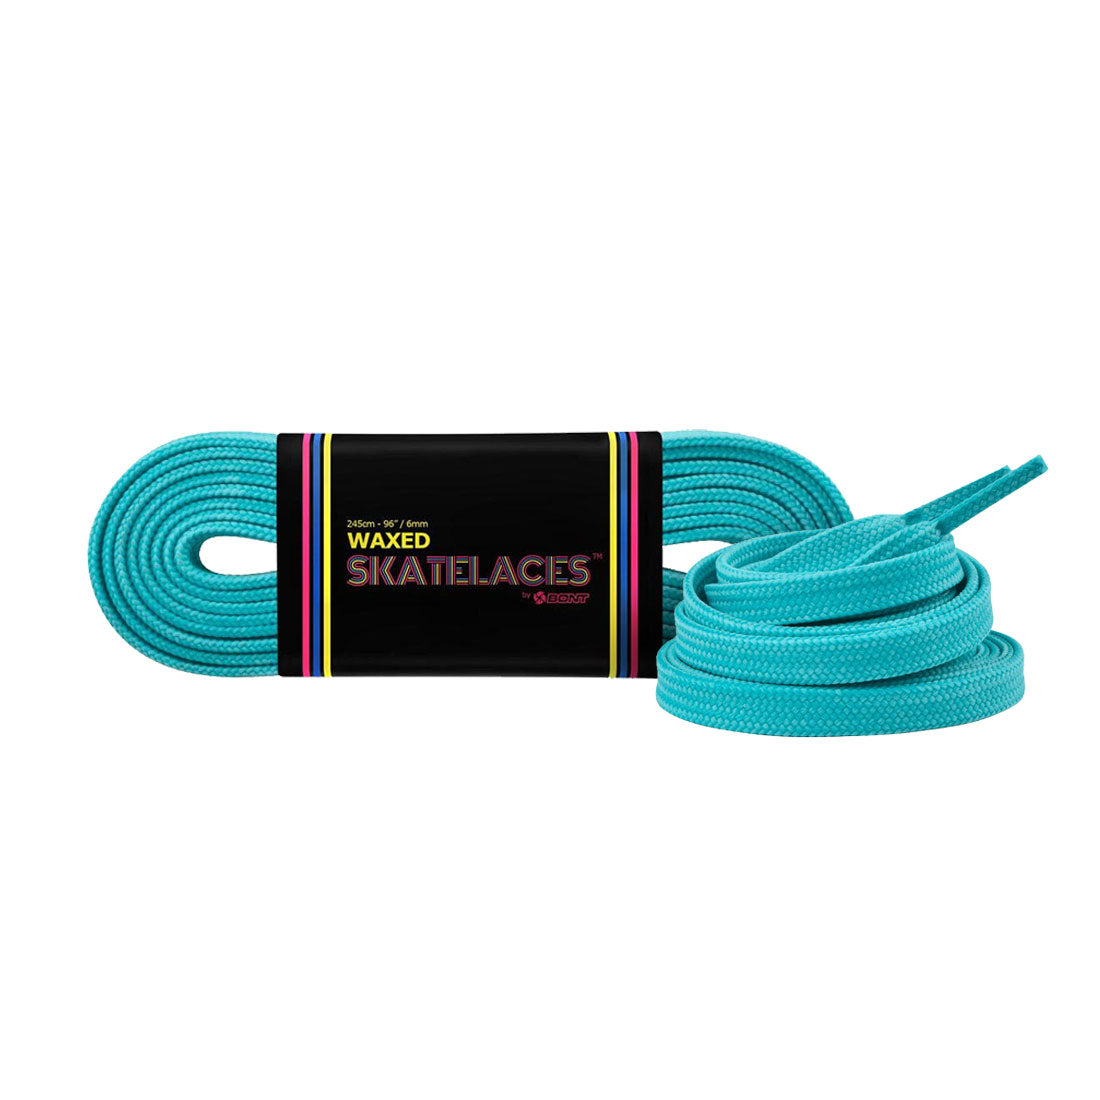 Bont Waxed 8mm Laces - 150cm/59in Pool Party Blue Laces